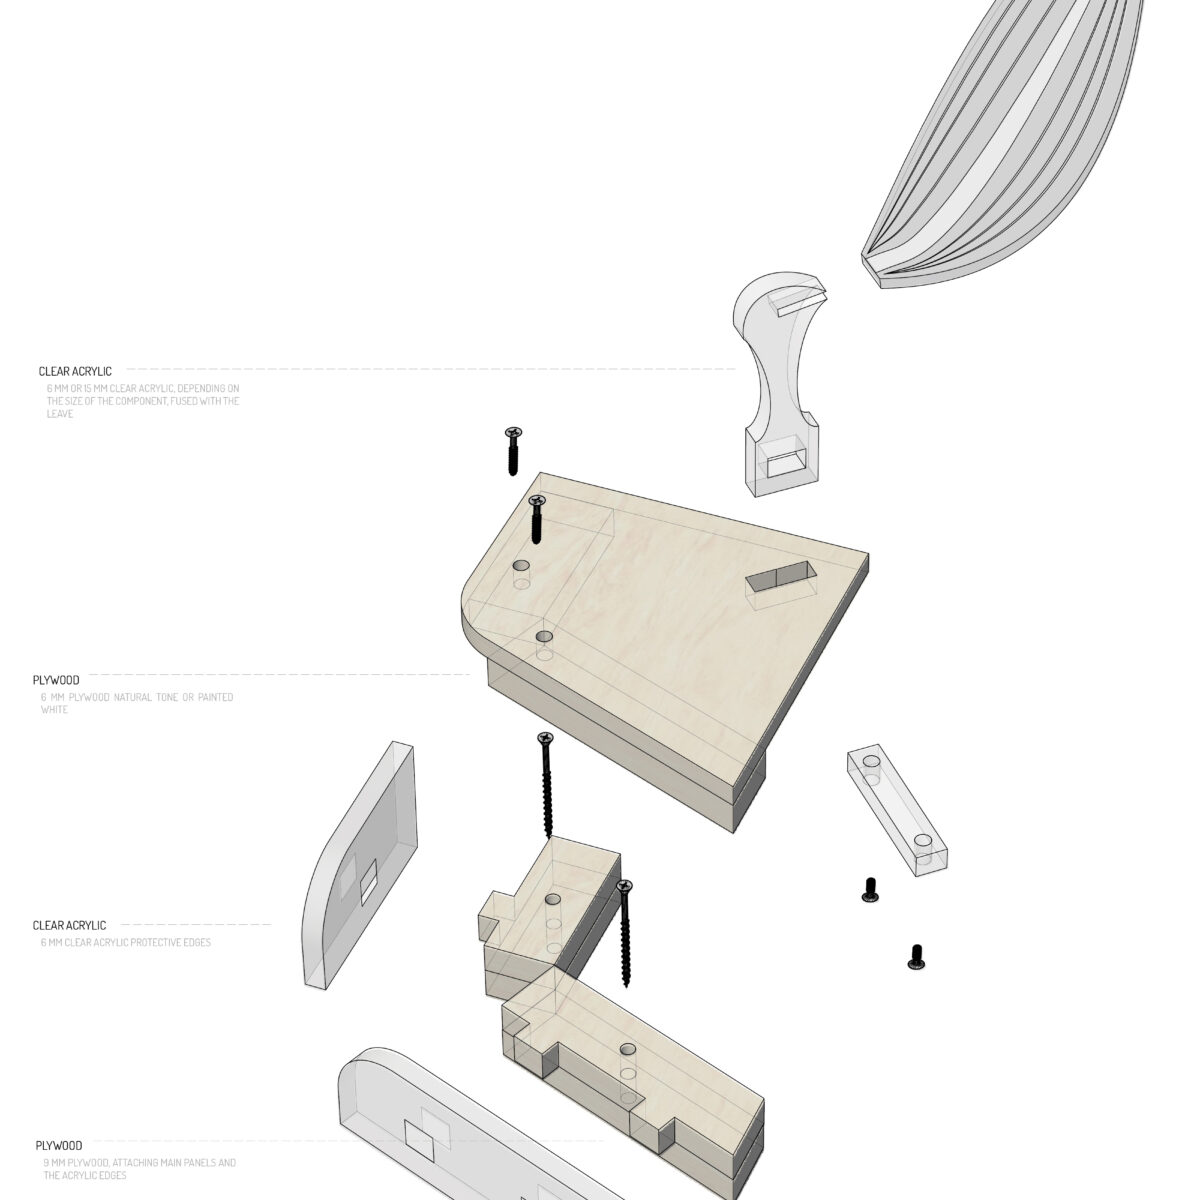 Diagram showing the components of the installation ©Mamou-Mani